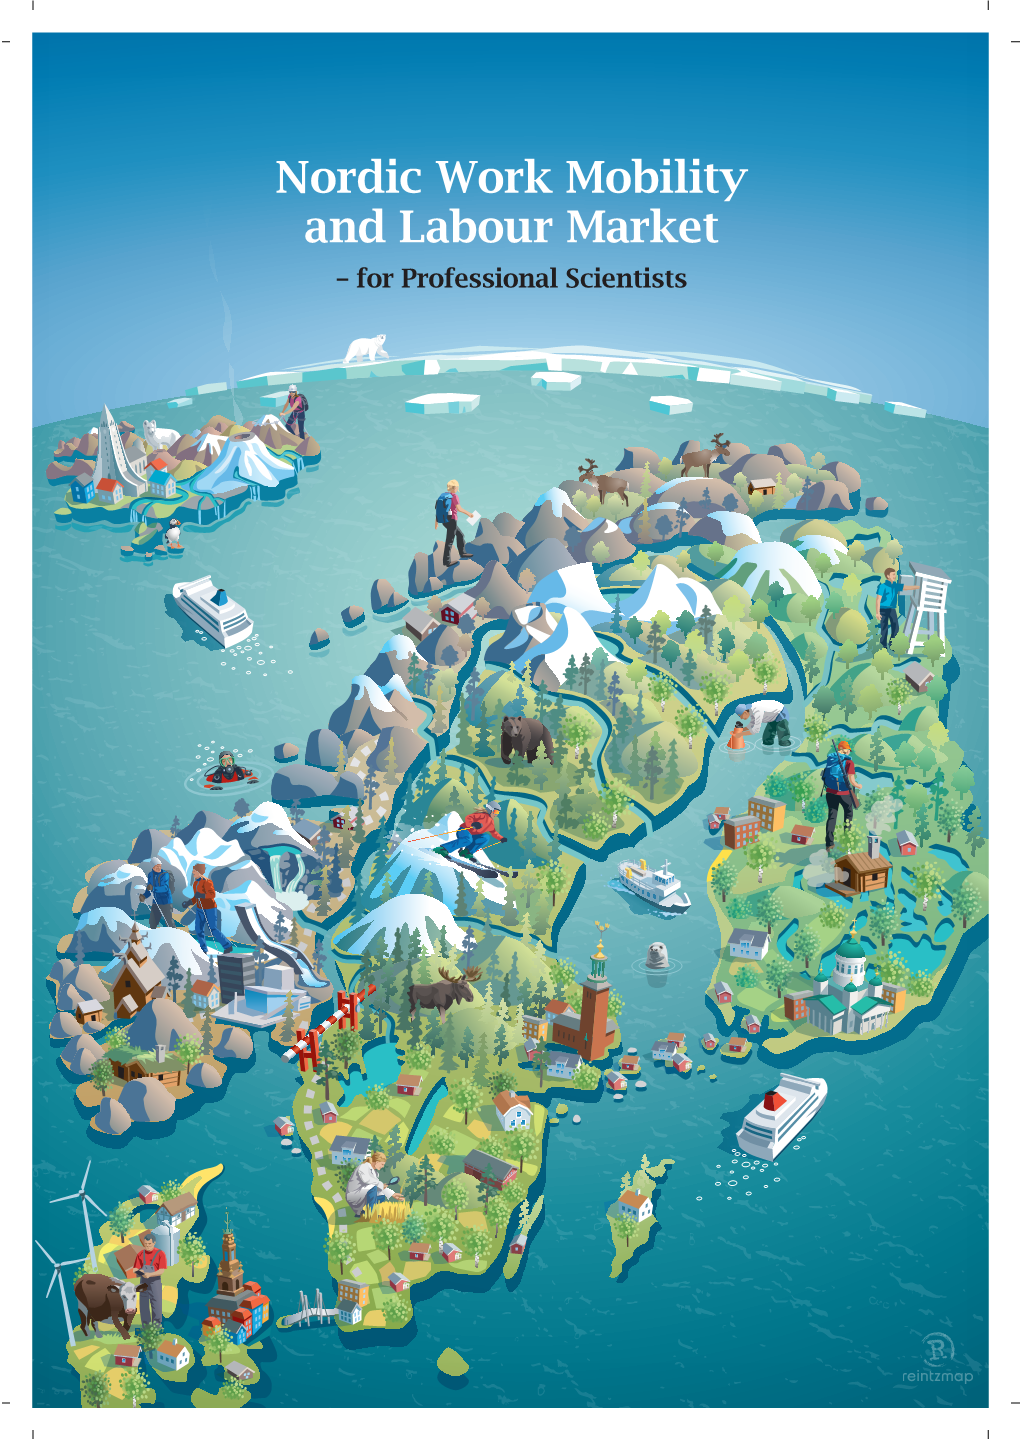 Nordic Work Mobility and Labour Market